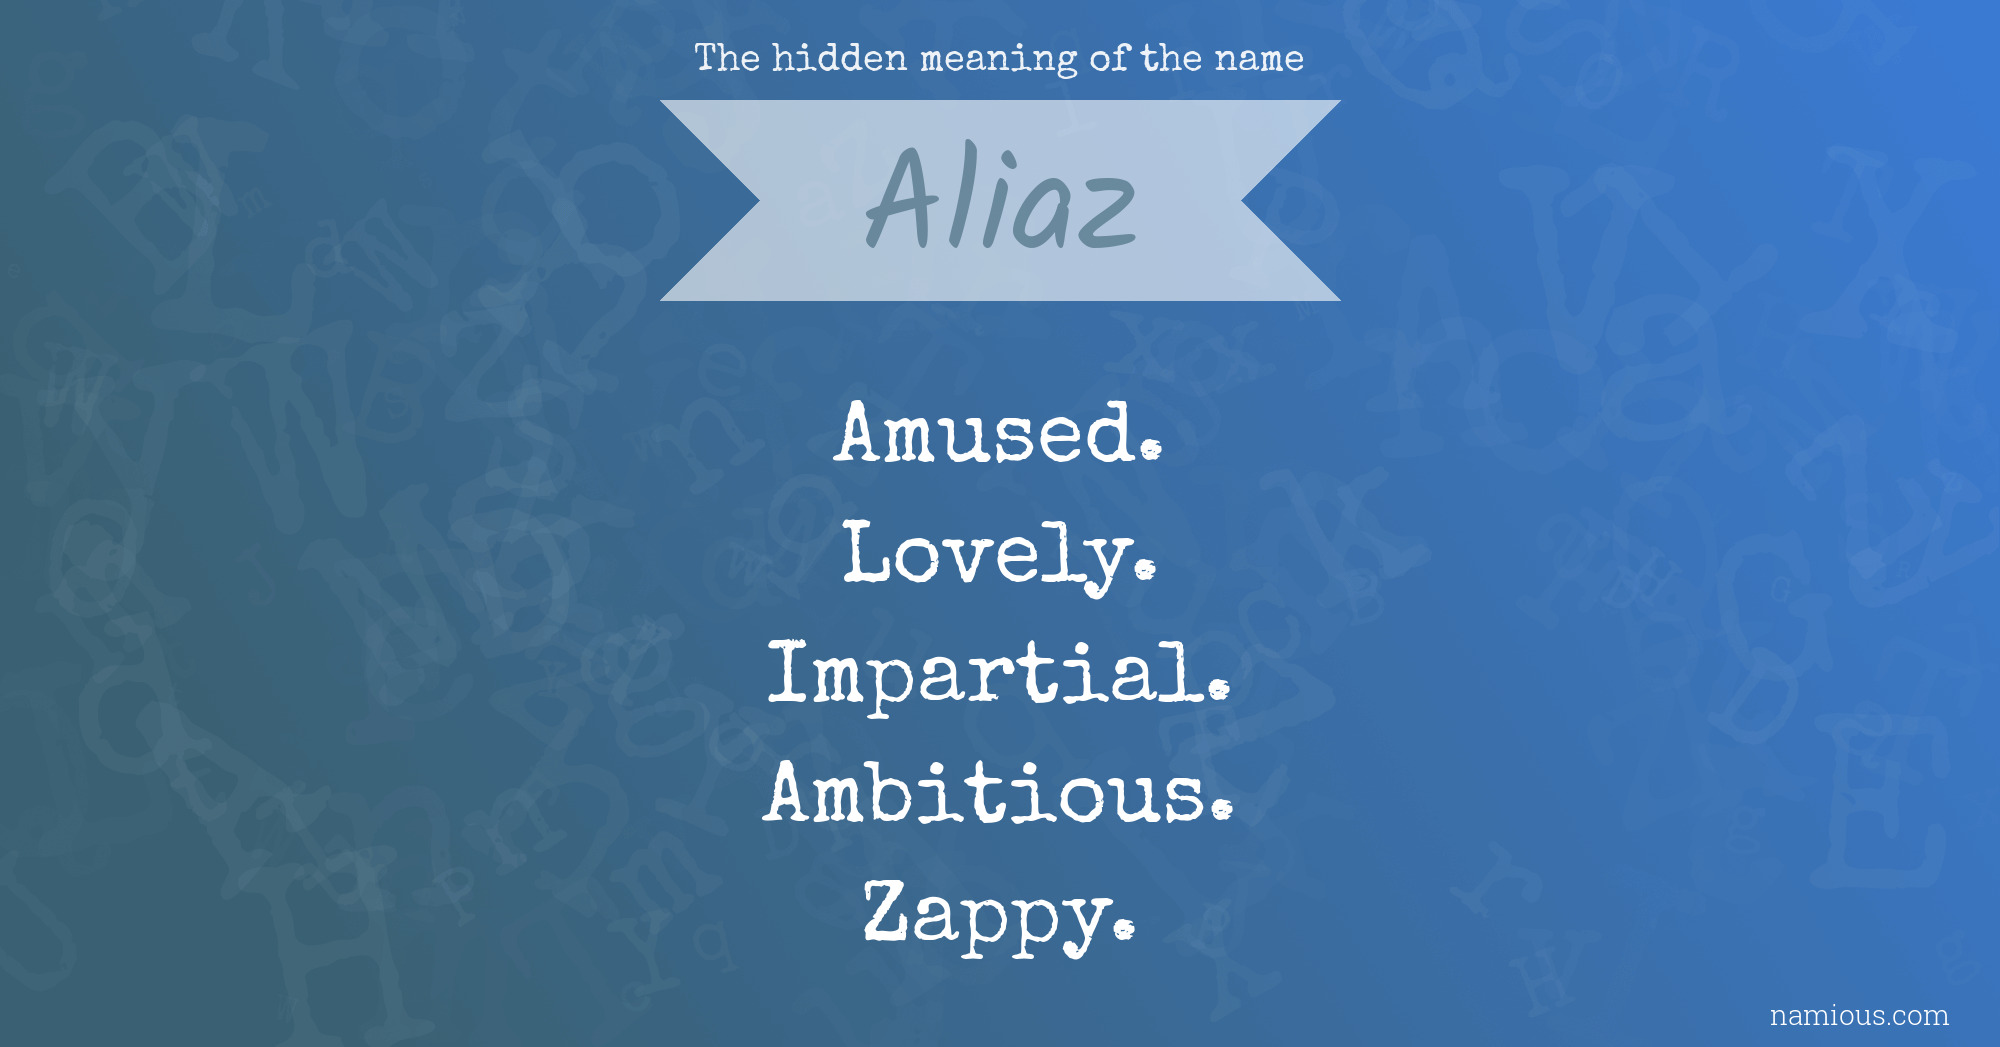 The hidden meaning of the name Aliaz